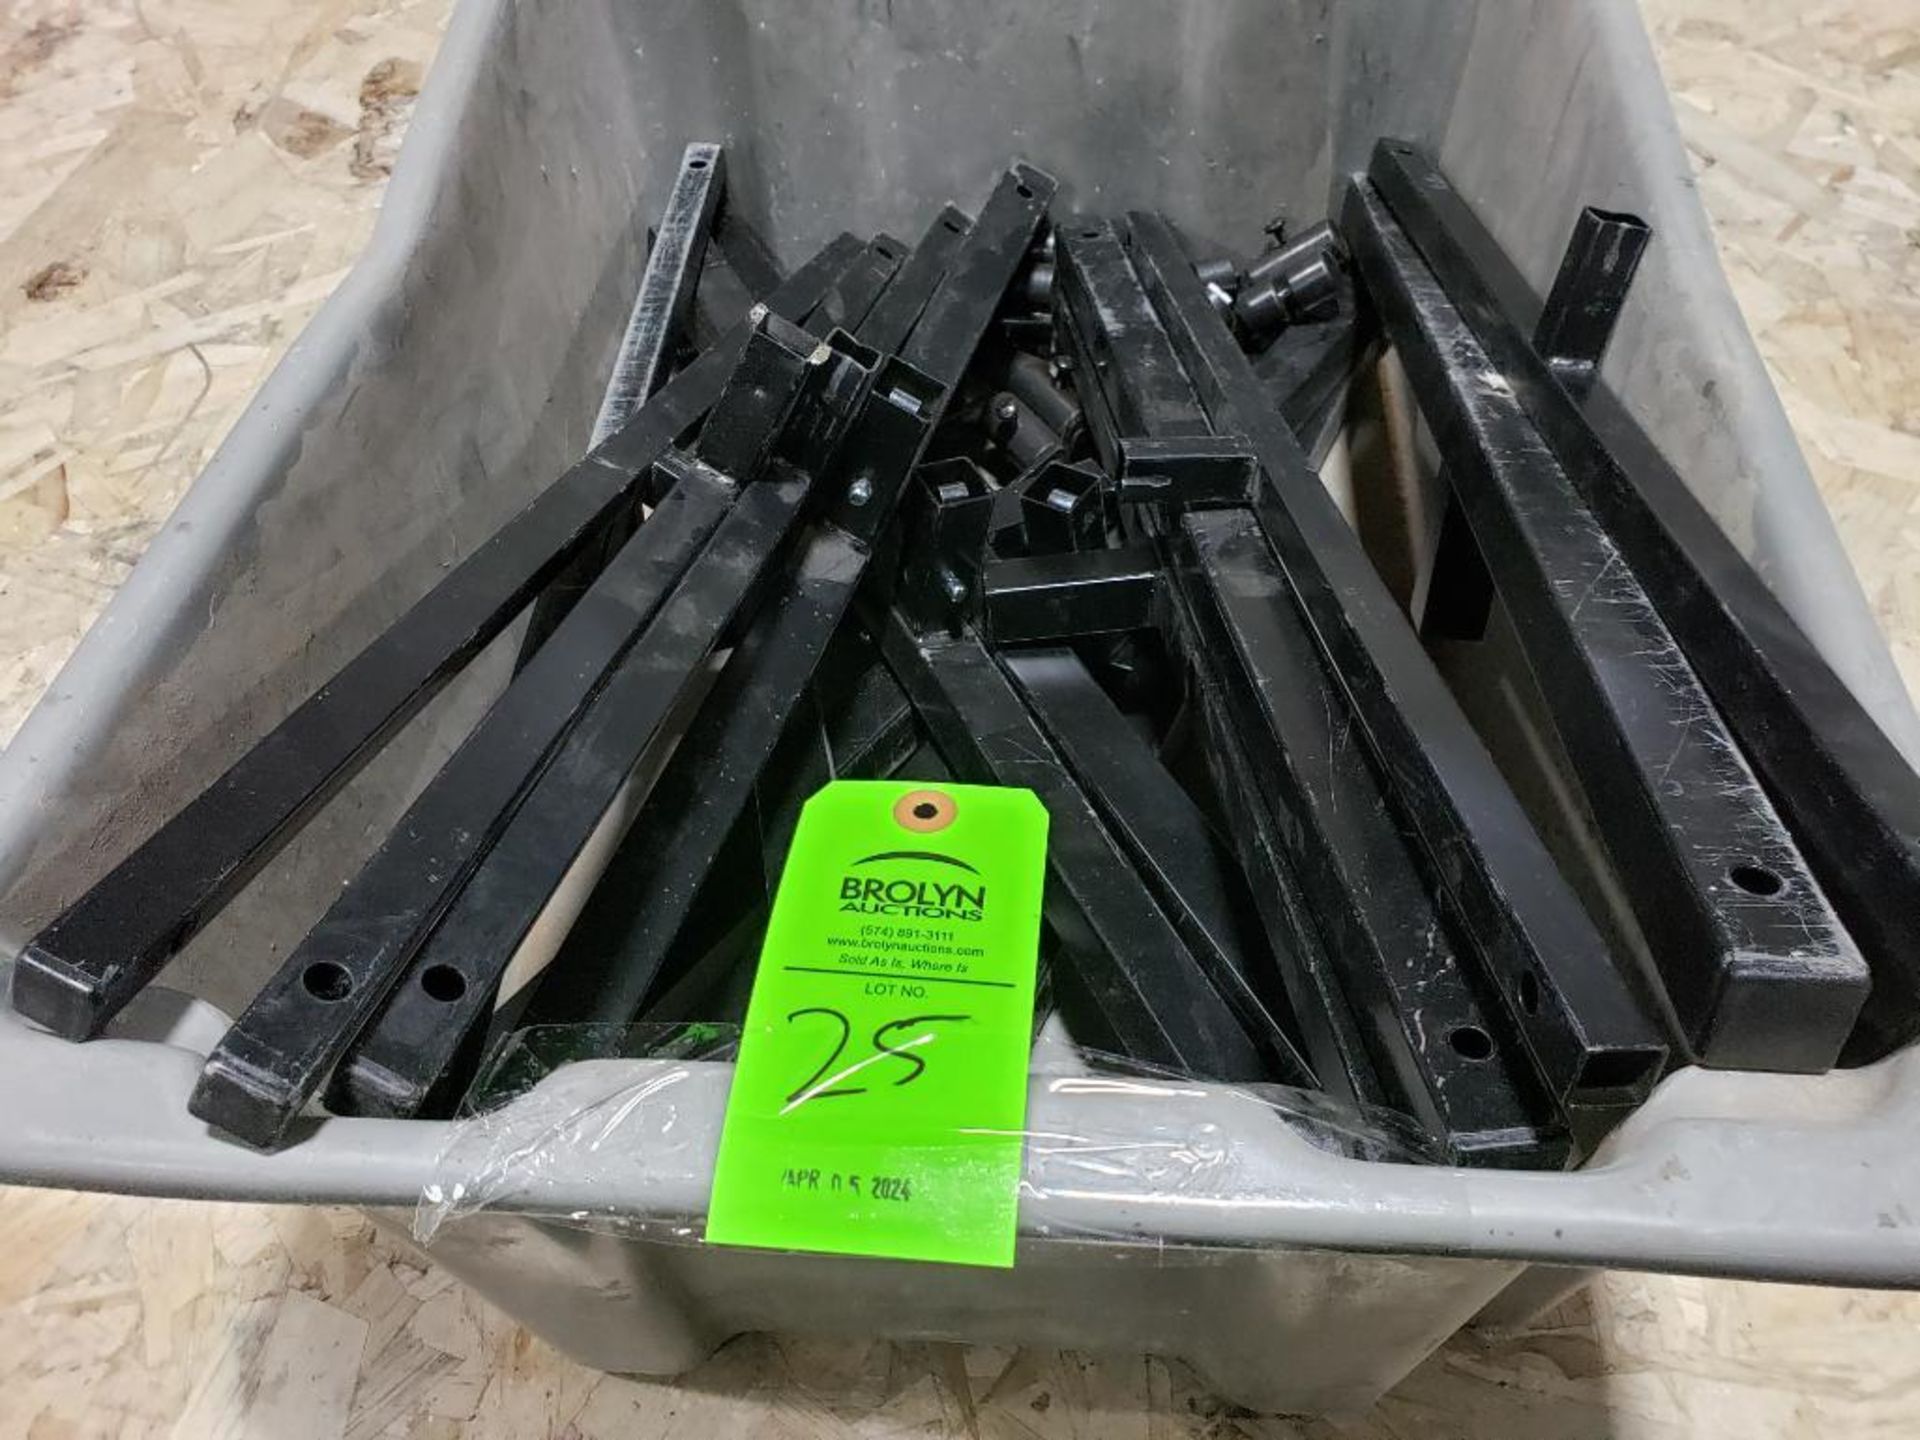 Large qty of welding curtain support legs.